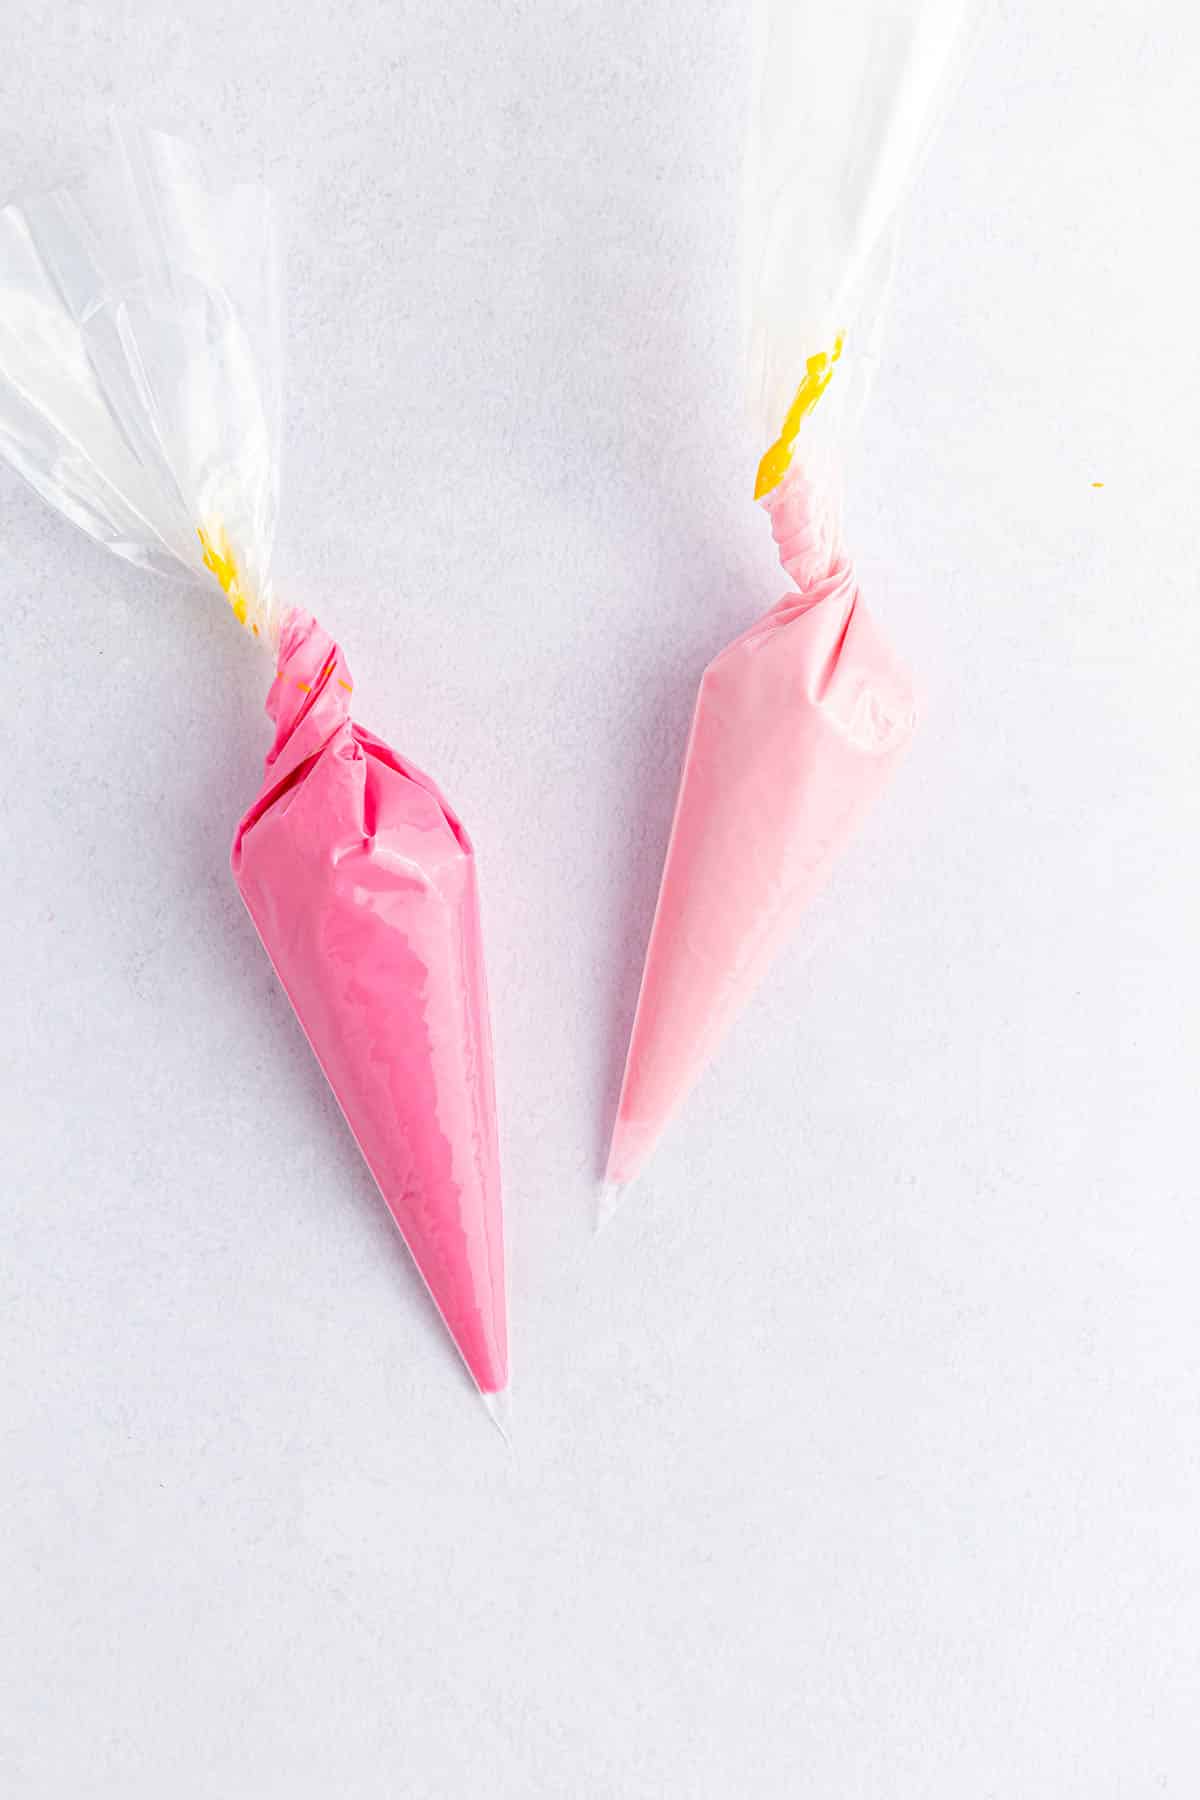 Piping bags in two pink melted chocolates